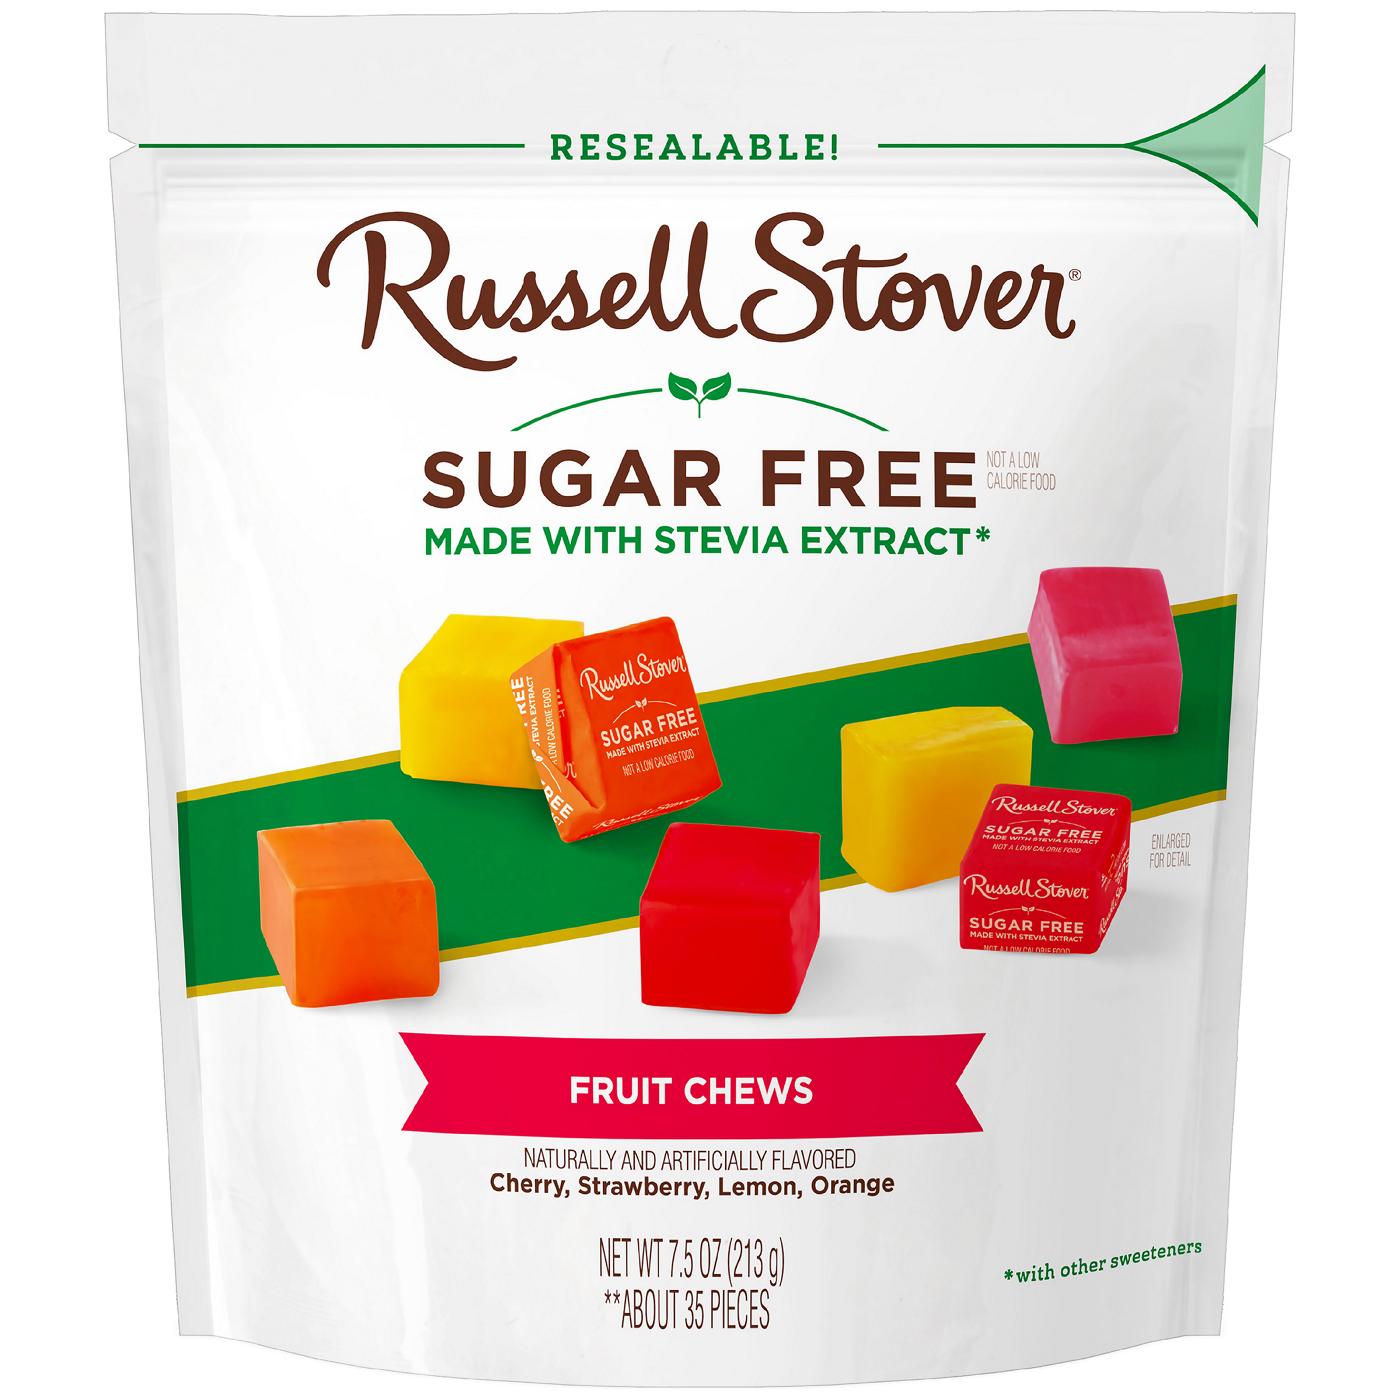 Russell Stover Sugar Free Fruit Chews; image 1 of 6